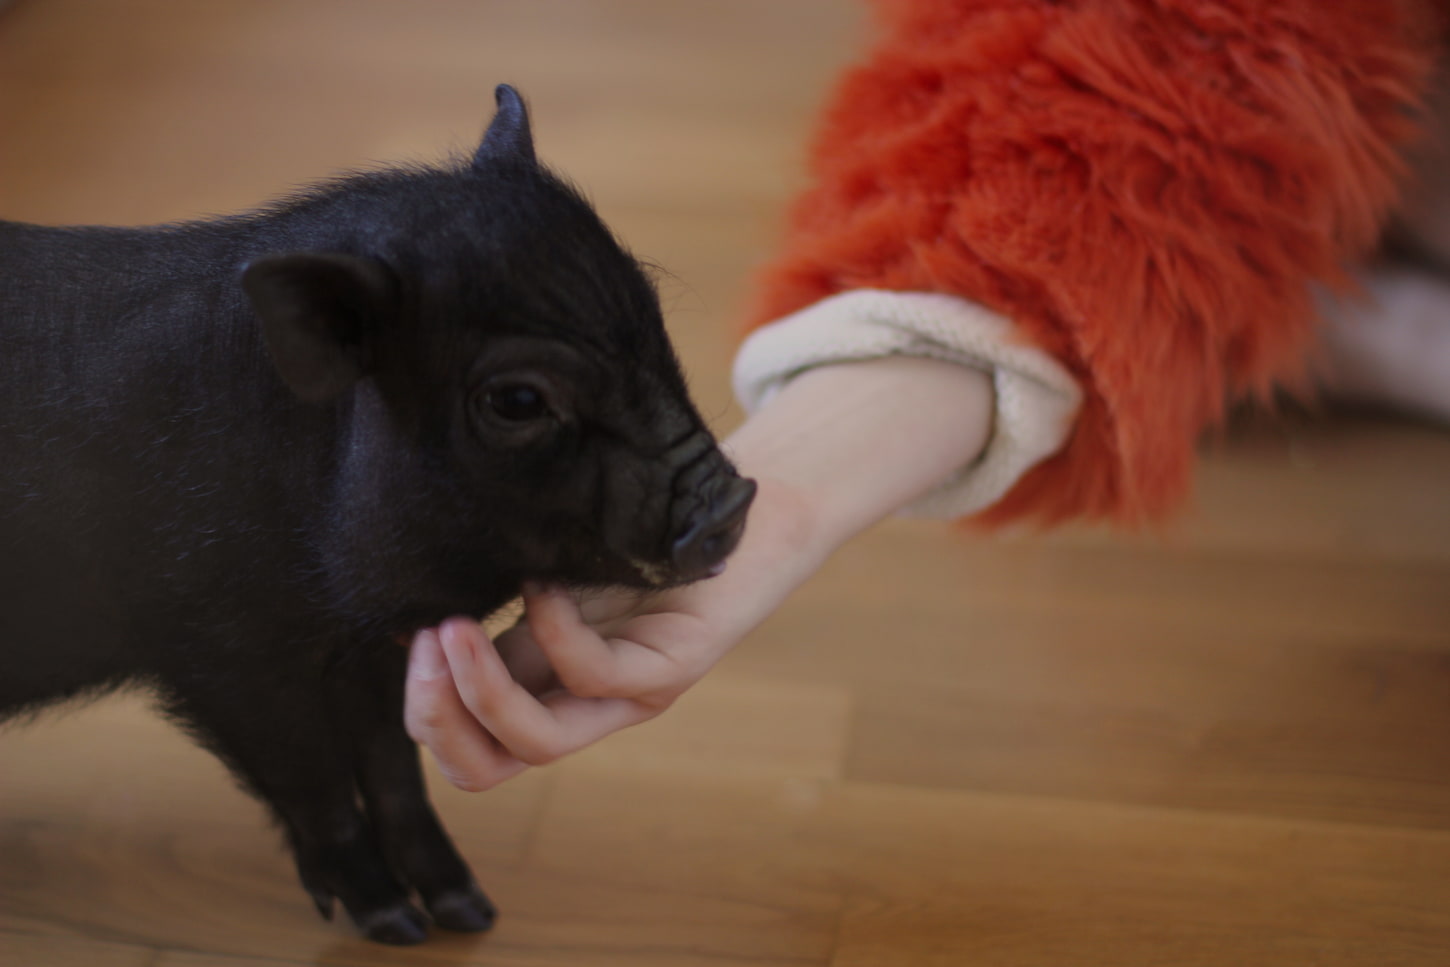 An image of a black piglet petting by woman hand inside the house.